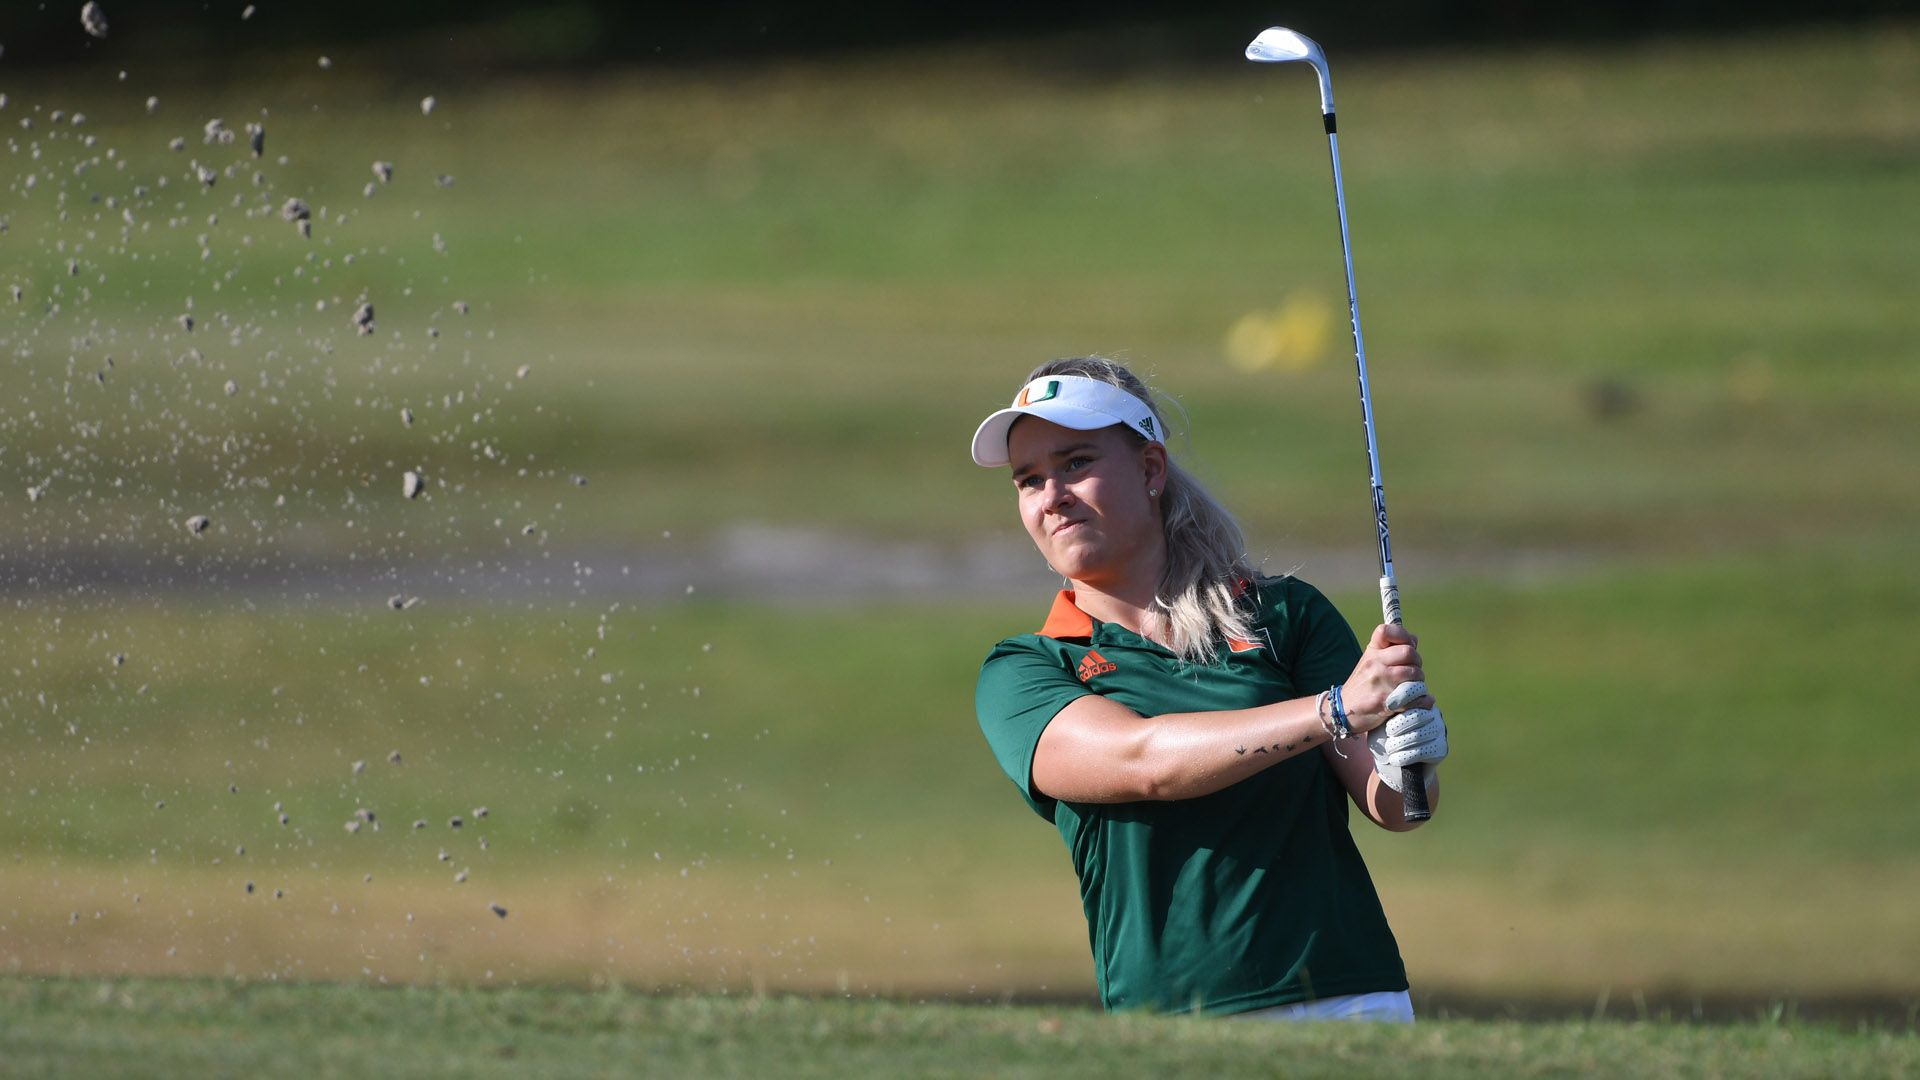 Miami Golf in 15th at the NCAA Cle Elum Regional